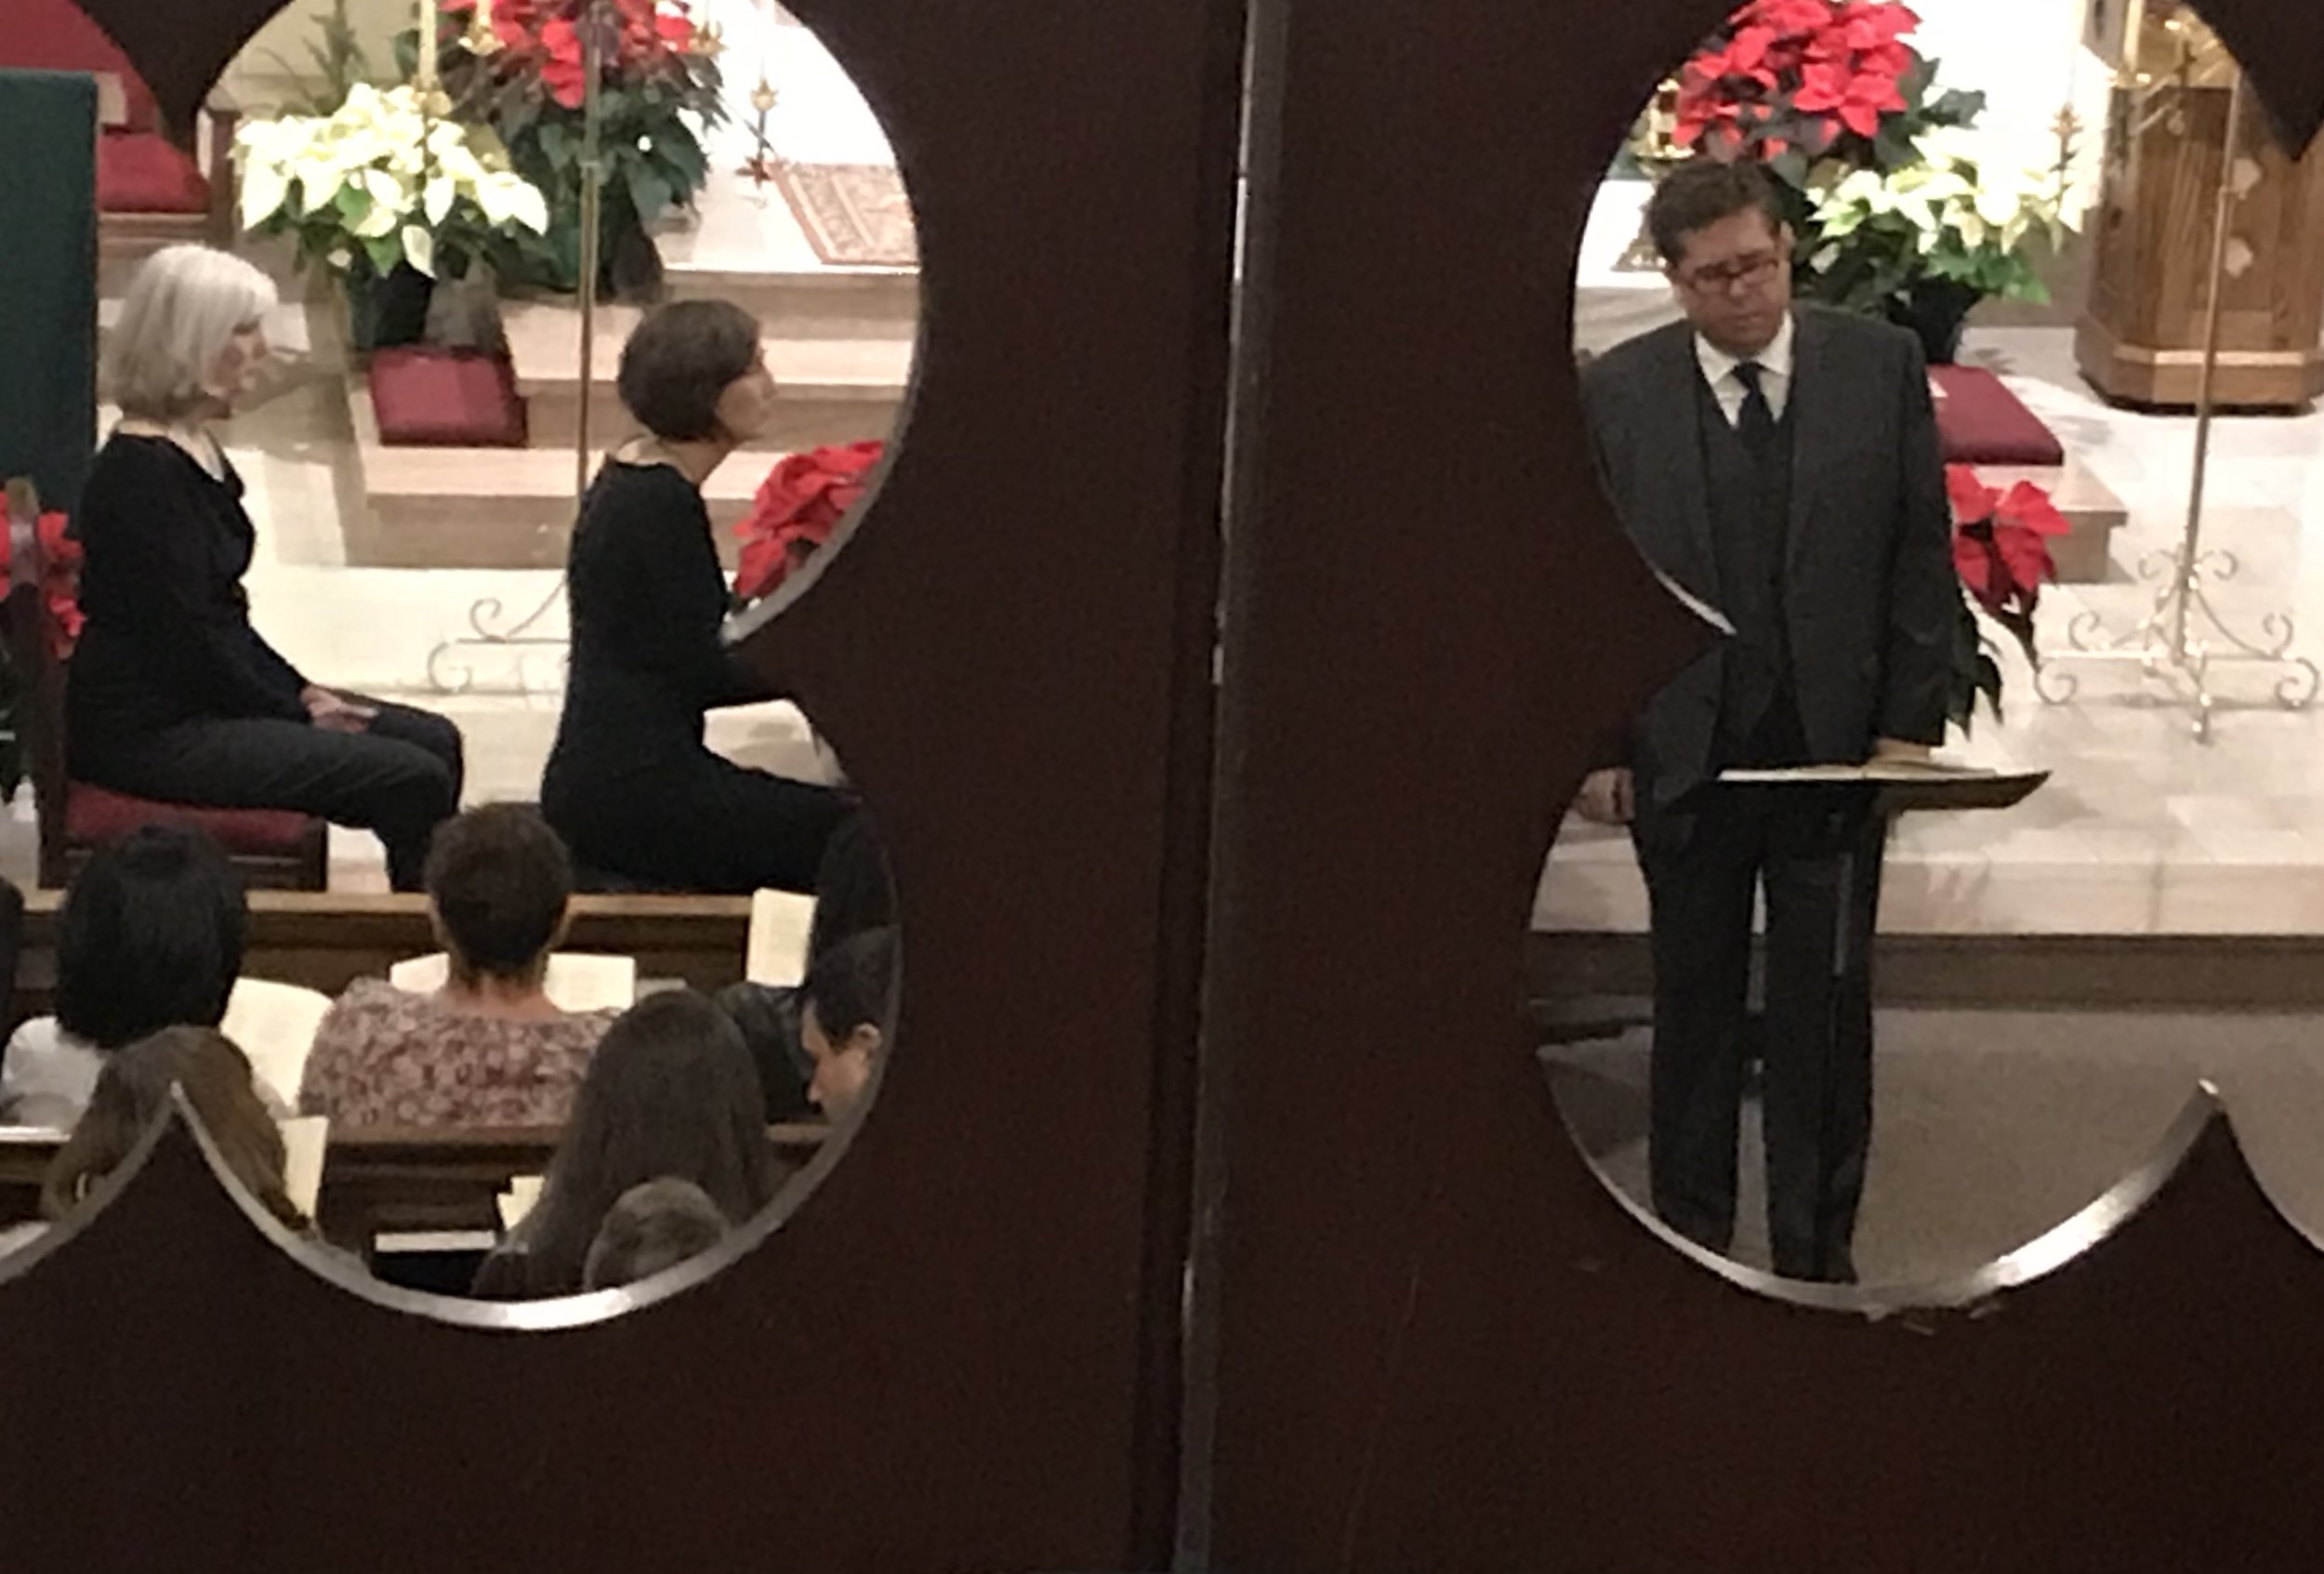 Heather & Andrew, seen from the choir loft